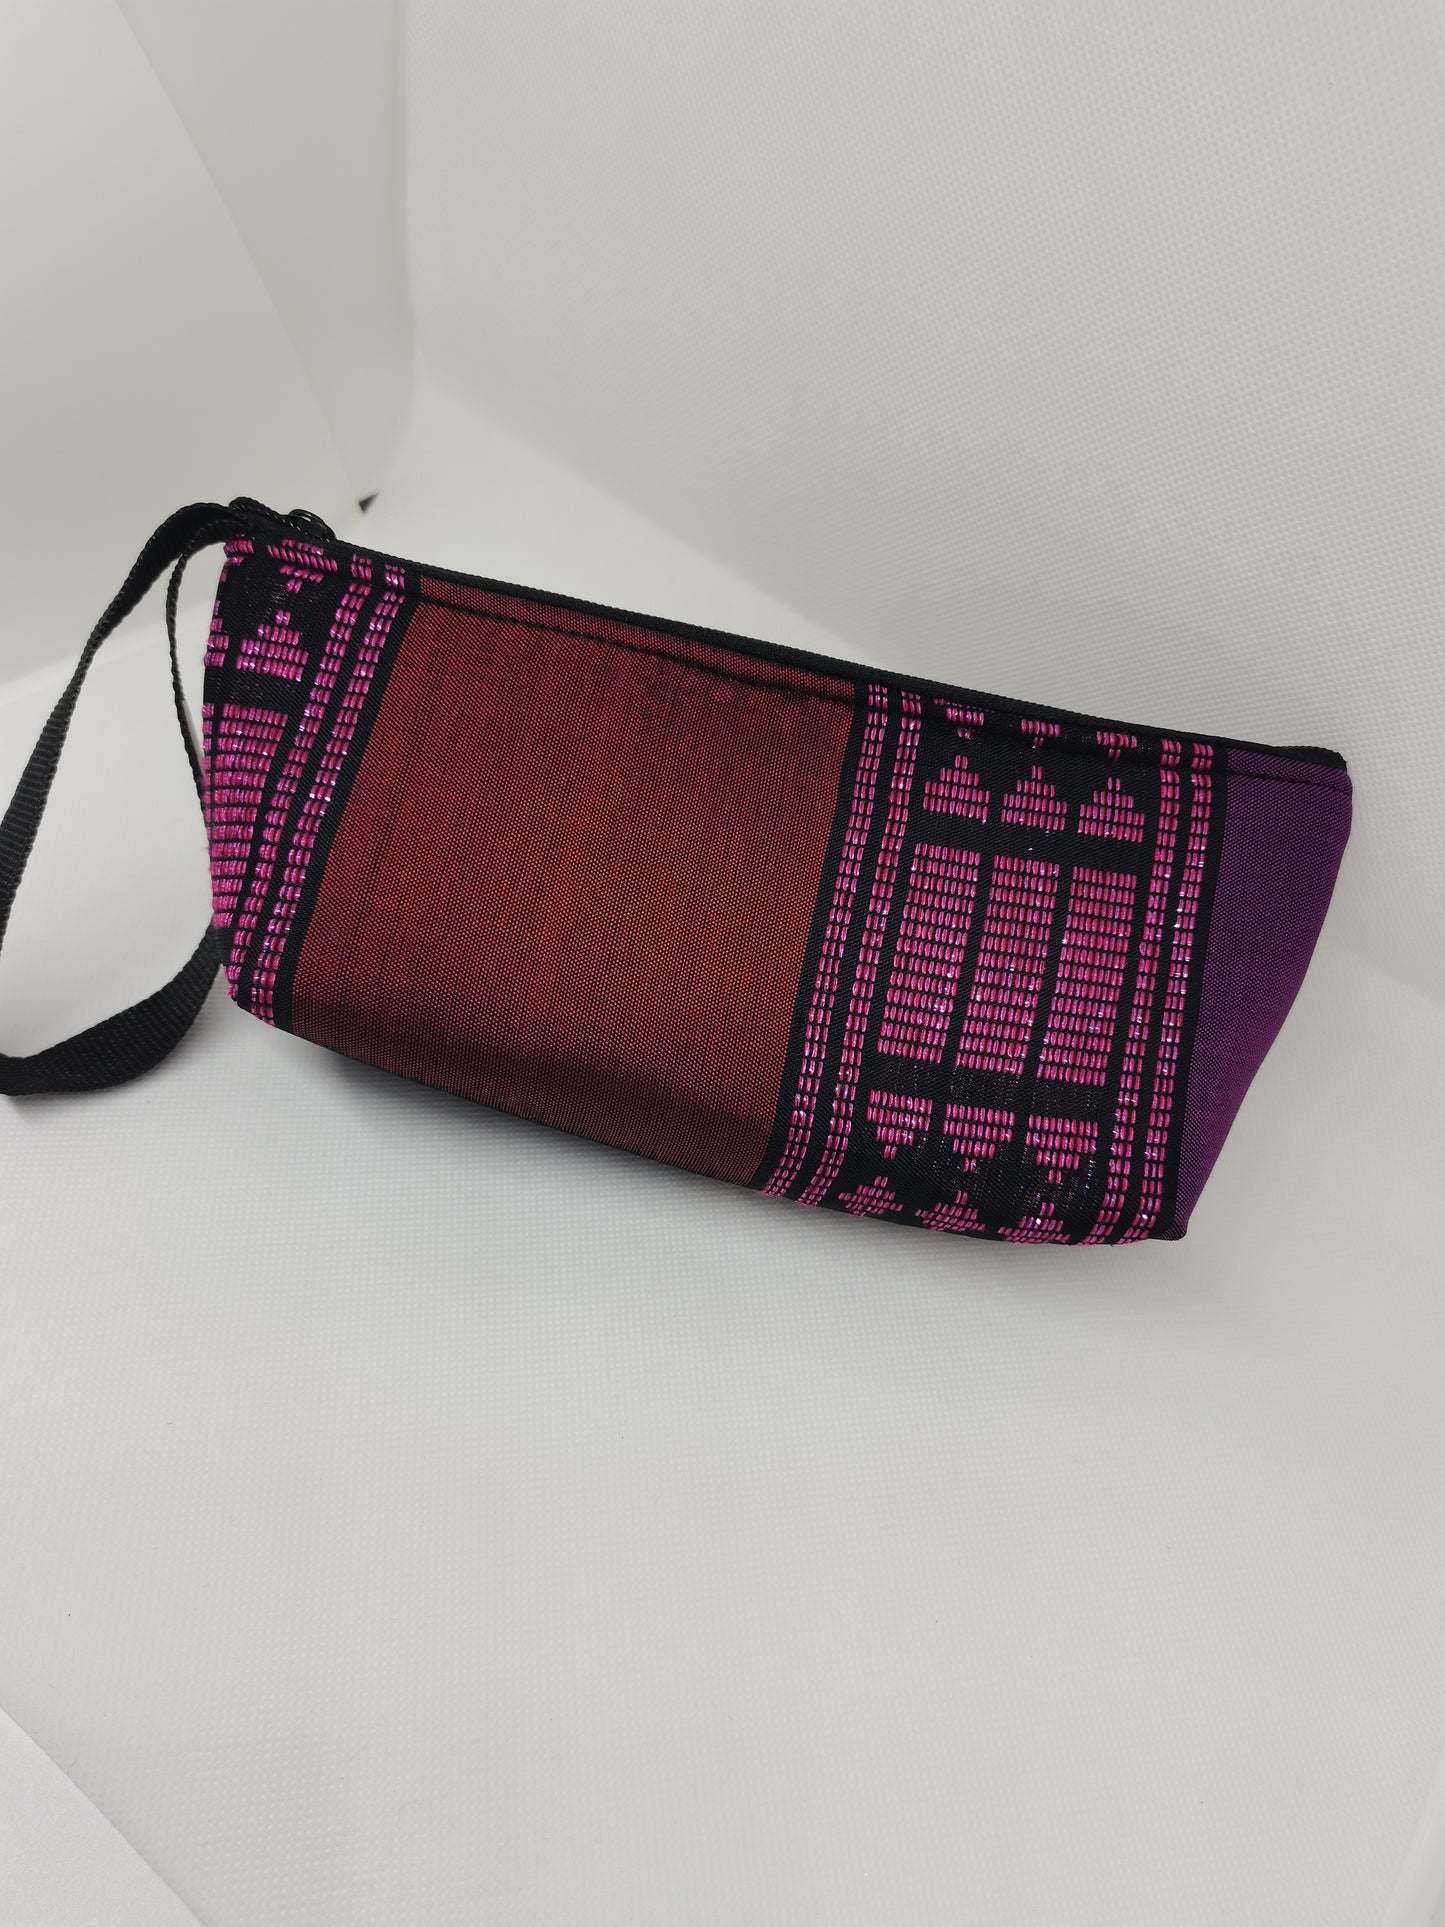 Inaul Pouch from Cotabato City